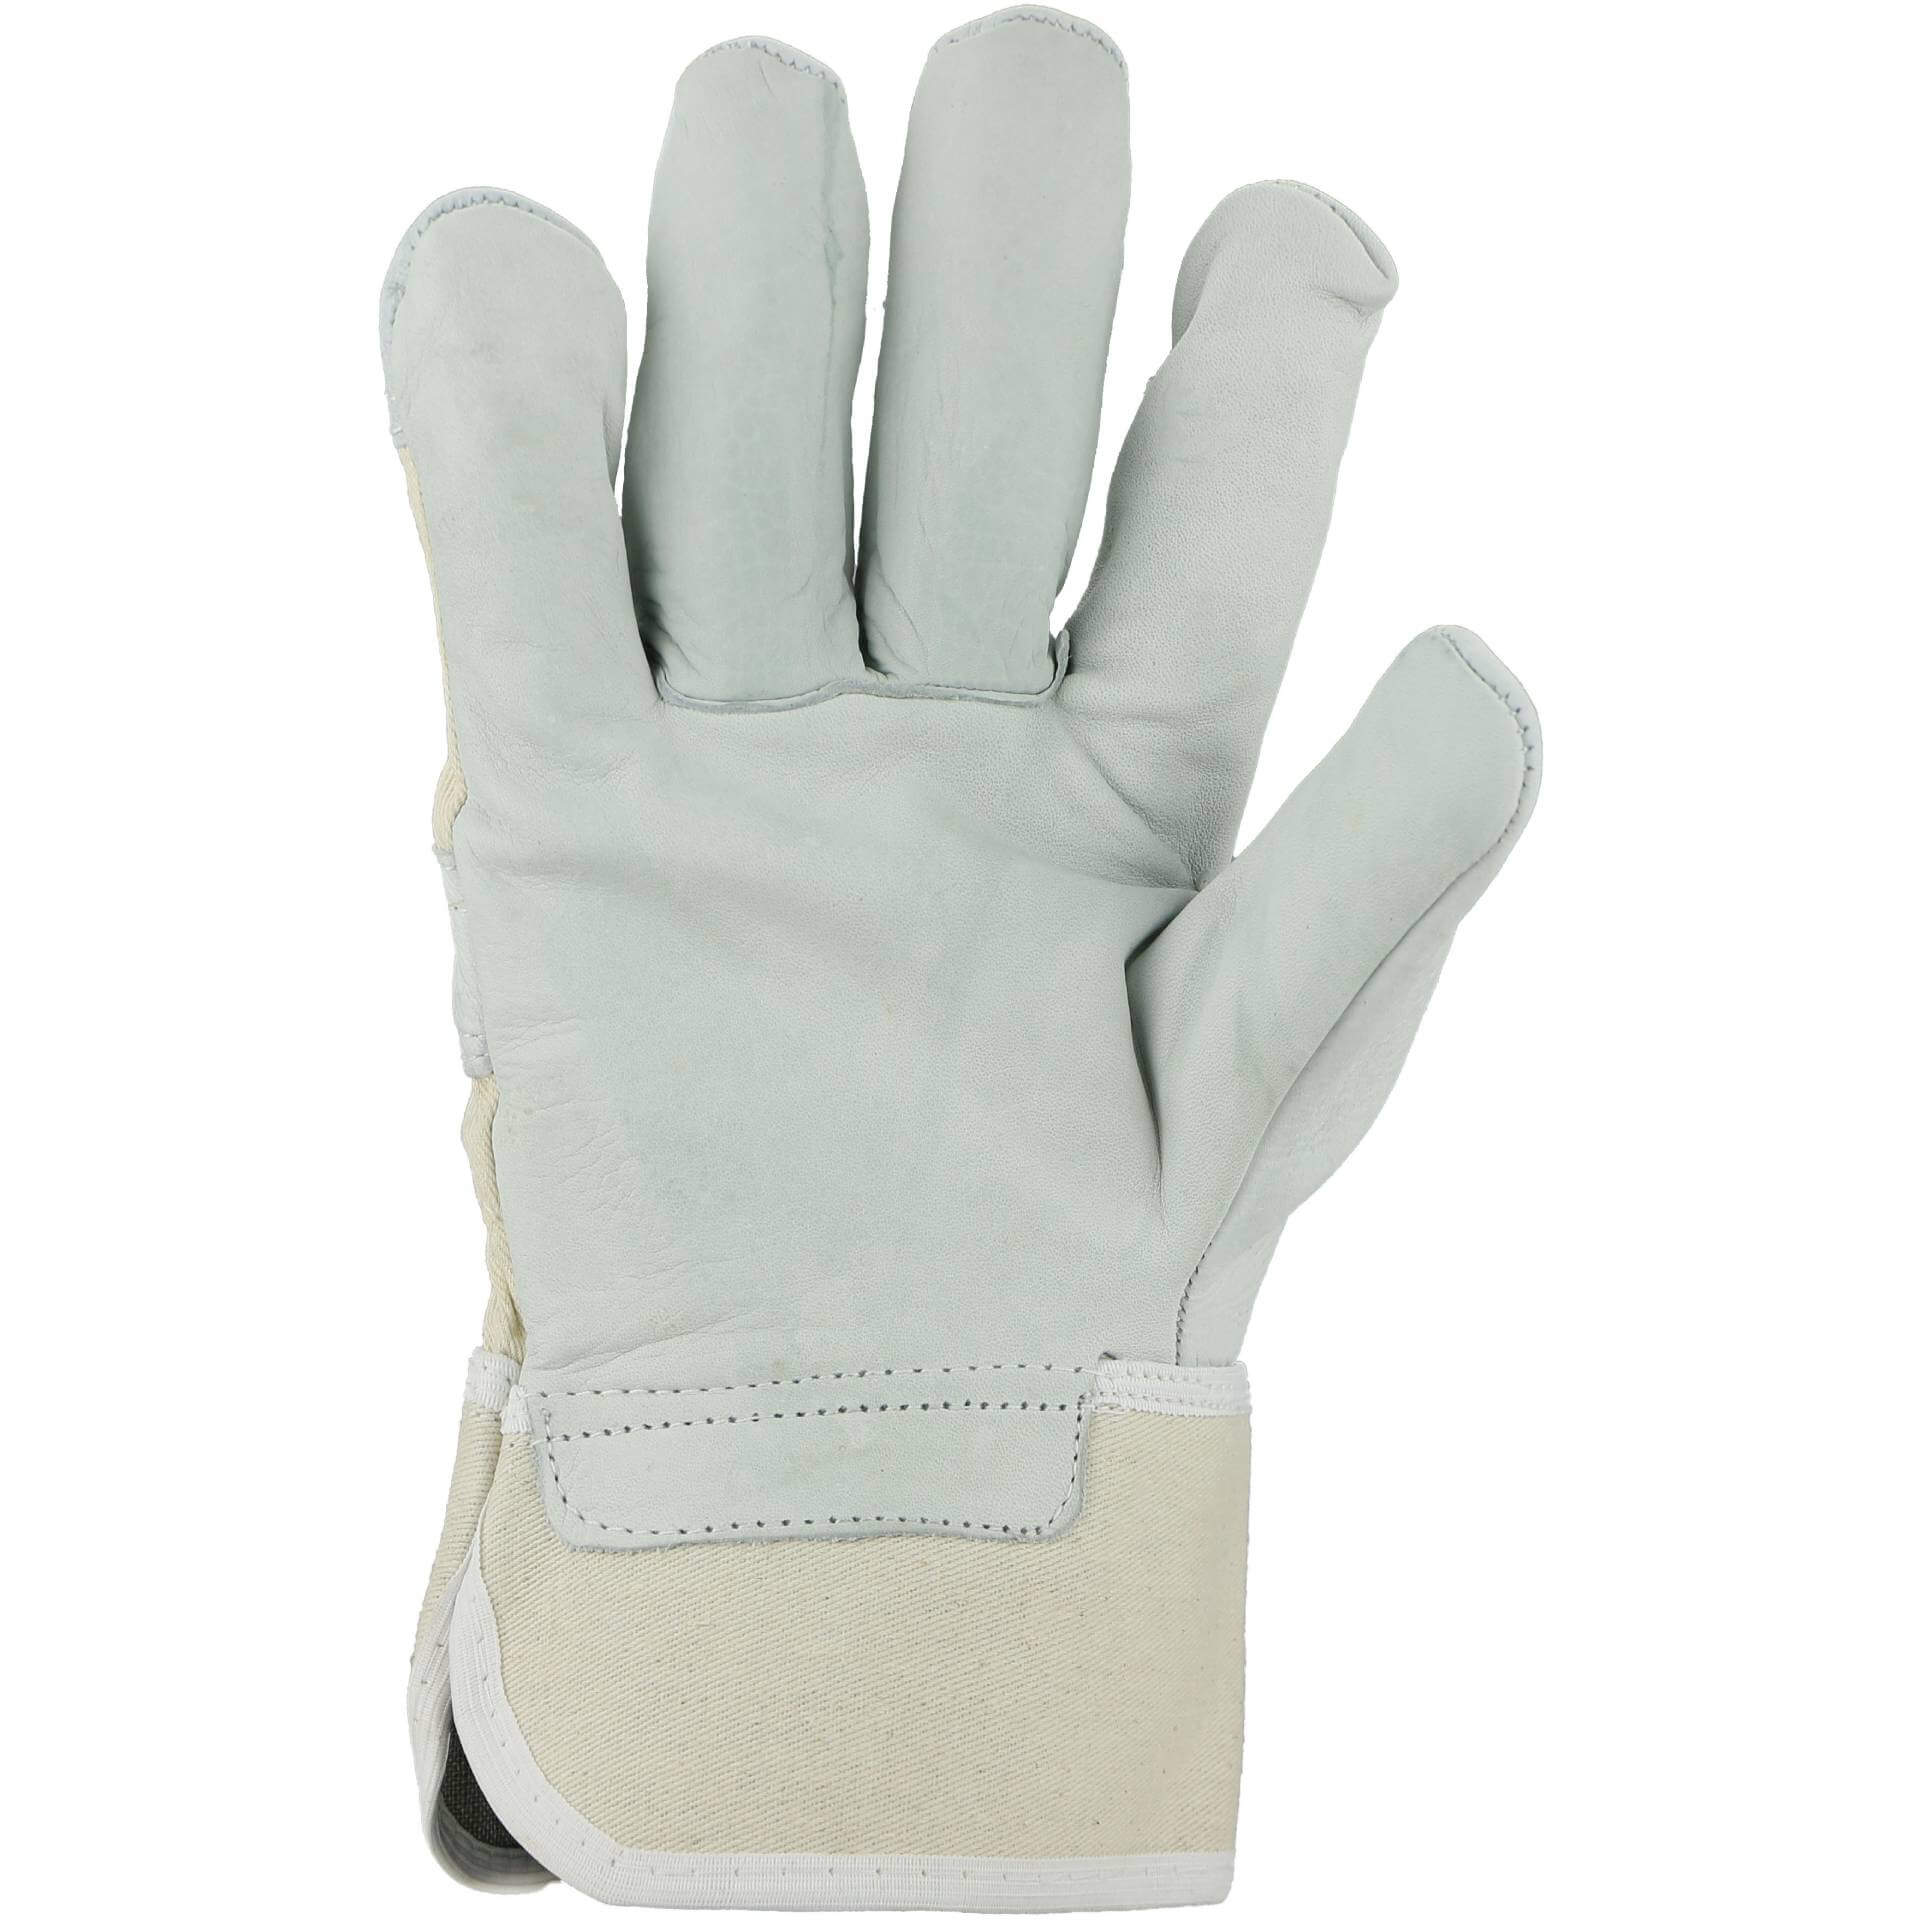 Product image Cow grain leather glove ADLER-C12